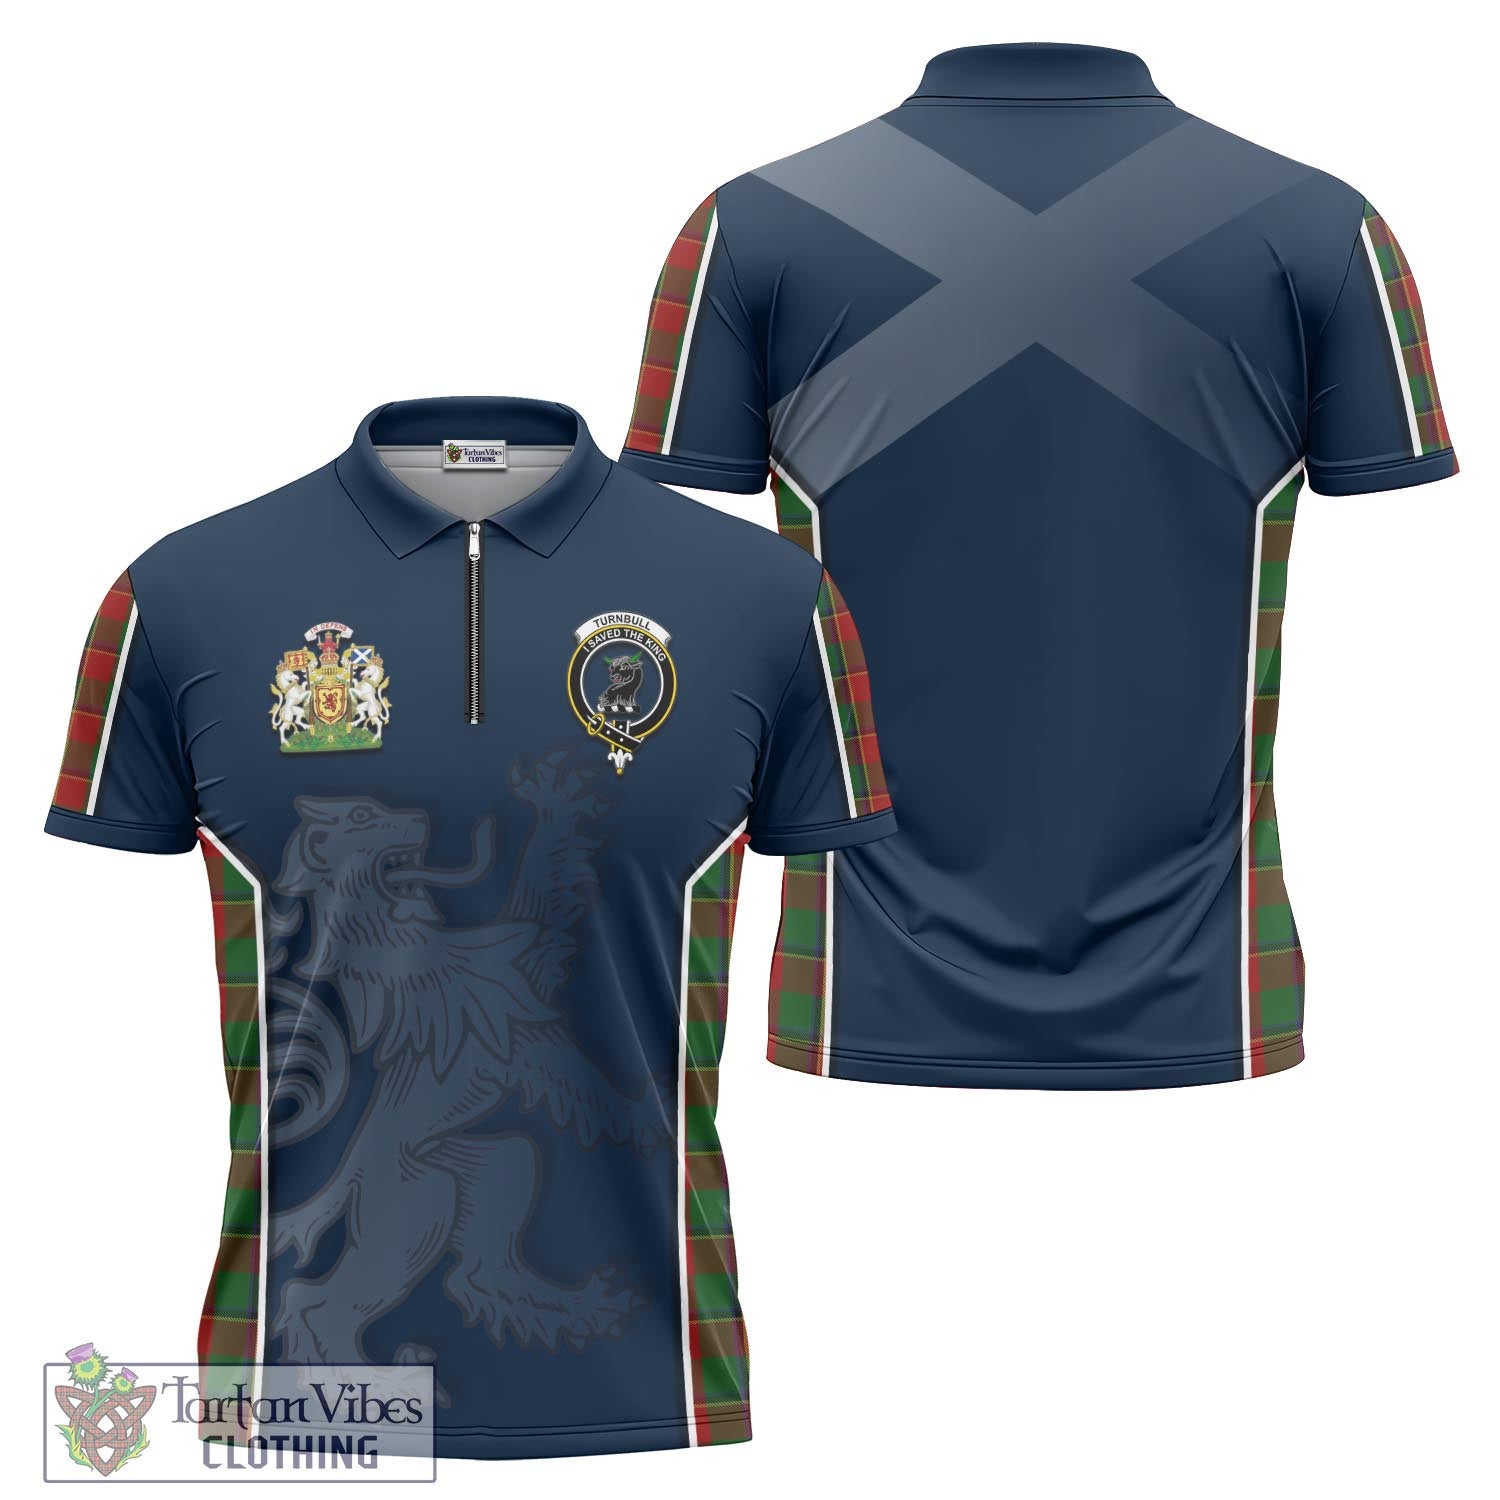 Tartan Vibes Clothing Turnbull Dress Tartan Zipper Polo Shirt with Family Crest and Lion Rampant Vibes Sport Style